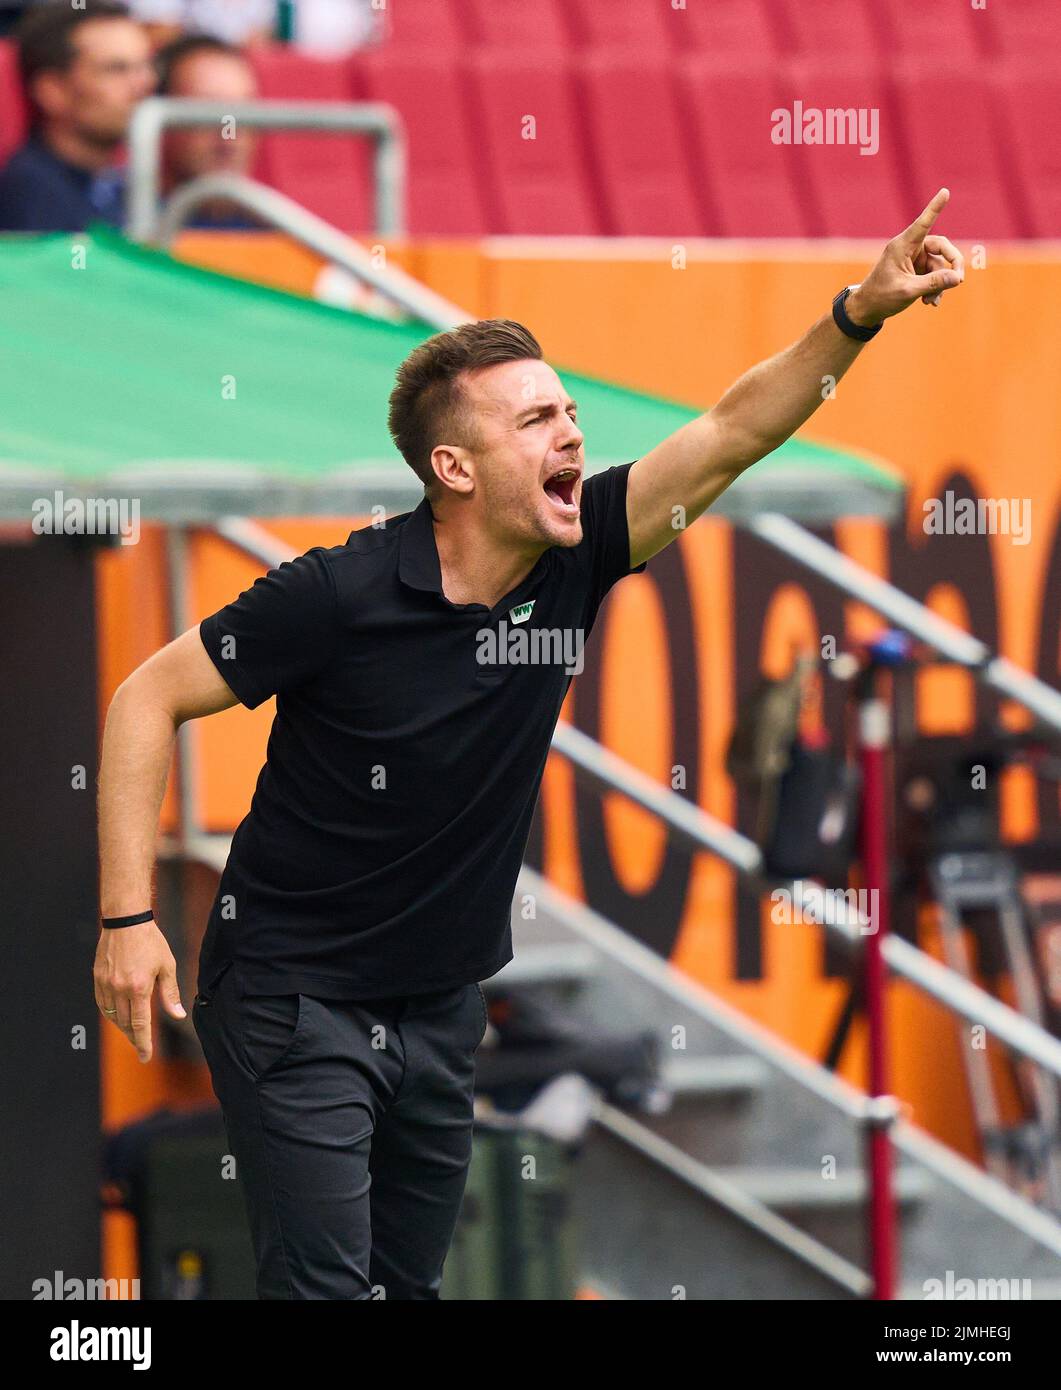 Enrico Maassen, FCA coach,  team manager,  in the match FC AUGSBURG - SC FREIBURG 1.German Football League on Aug 06, 2022 in Augsburg, Germany. Season 2022/2023, matchday 1, 1.Bundesliga, FCB, Munich, 1.Spieltag © Peter Schatz / Alamy Live News    - DFL REGULATIONS PROHIBIT ANY USE OF PHOTOGRAPHS as IMAGE SEQUENCES and/or QUASI-VIDEO - Stock Photo